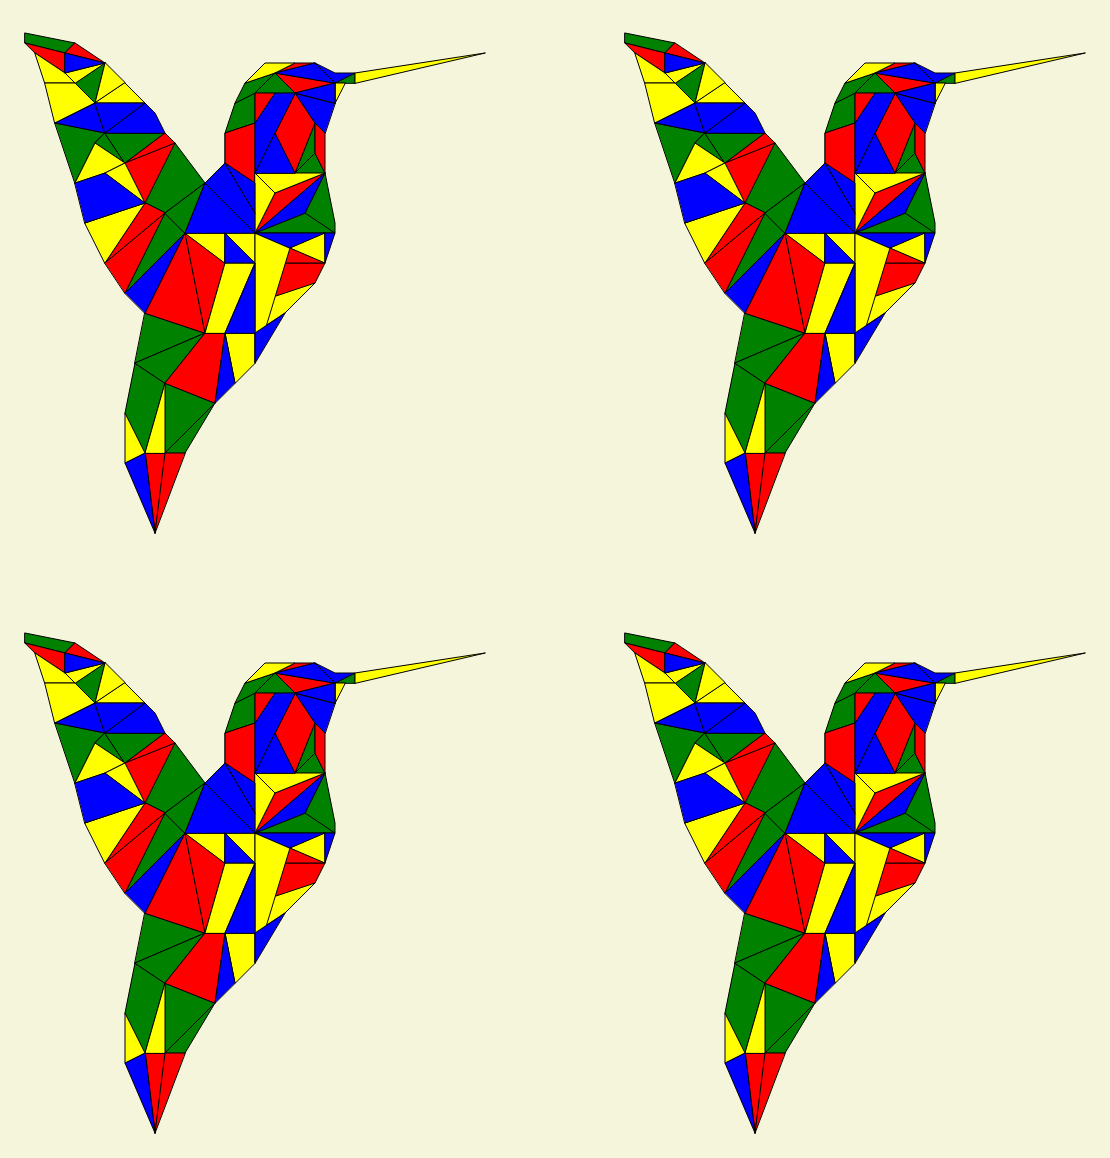 Red, blue, green, and yellow geometric shapes combine to form four identical hummingbirds.